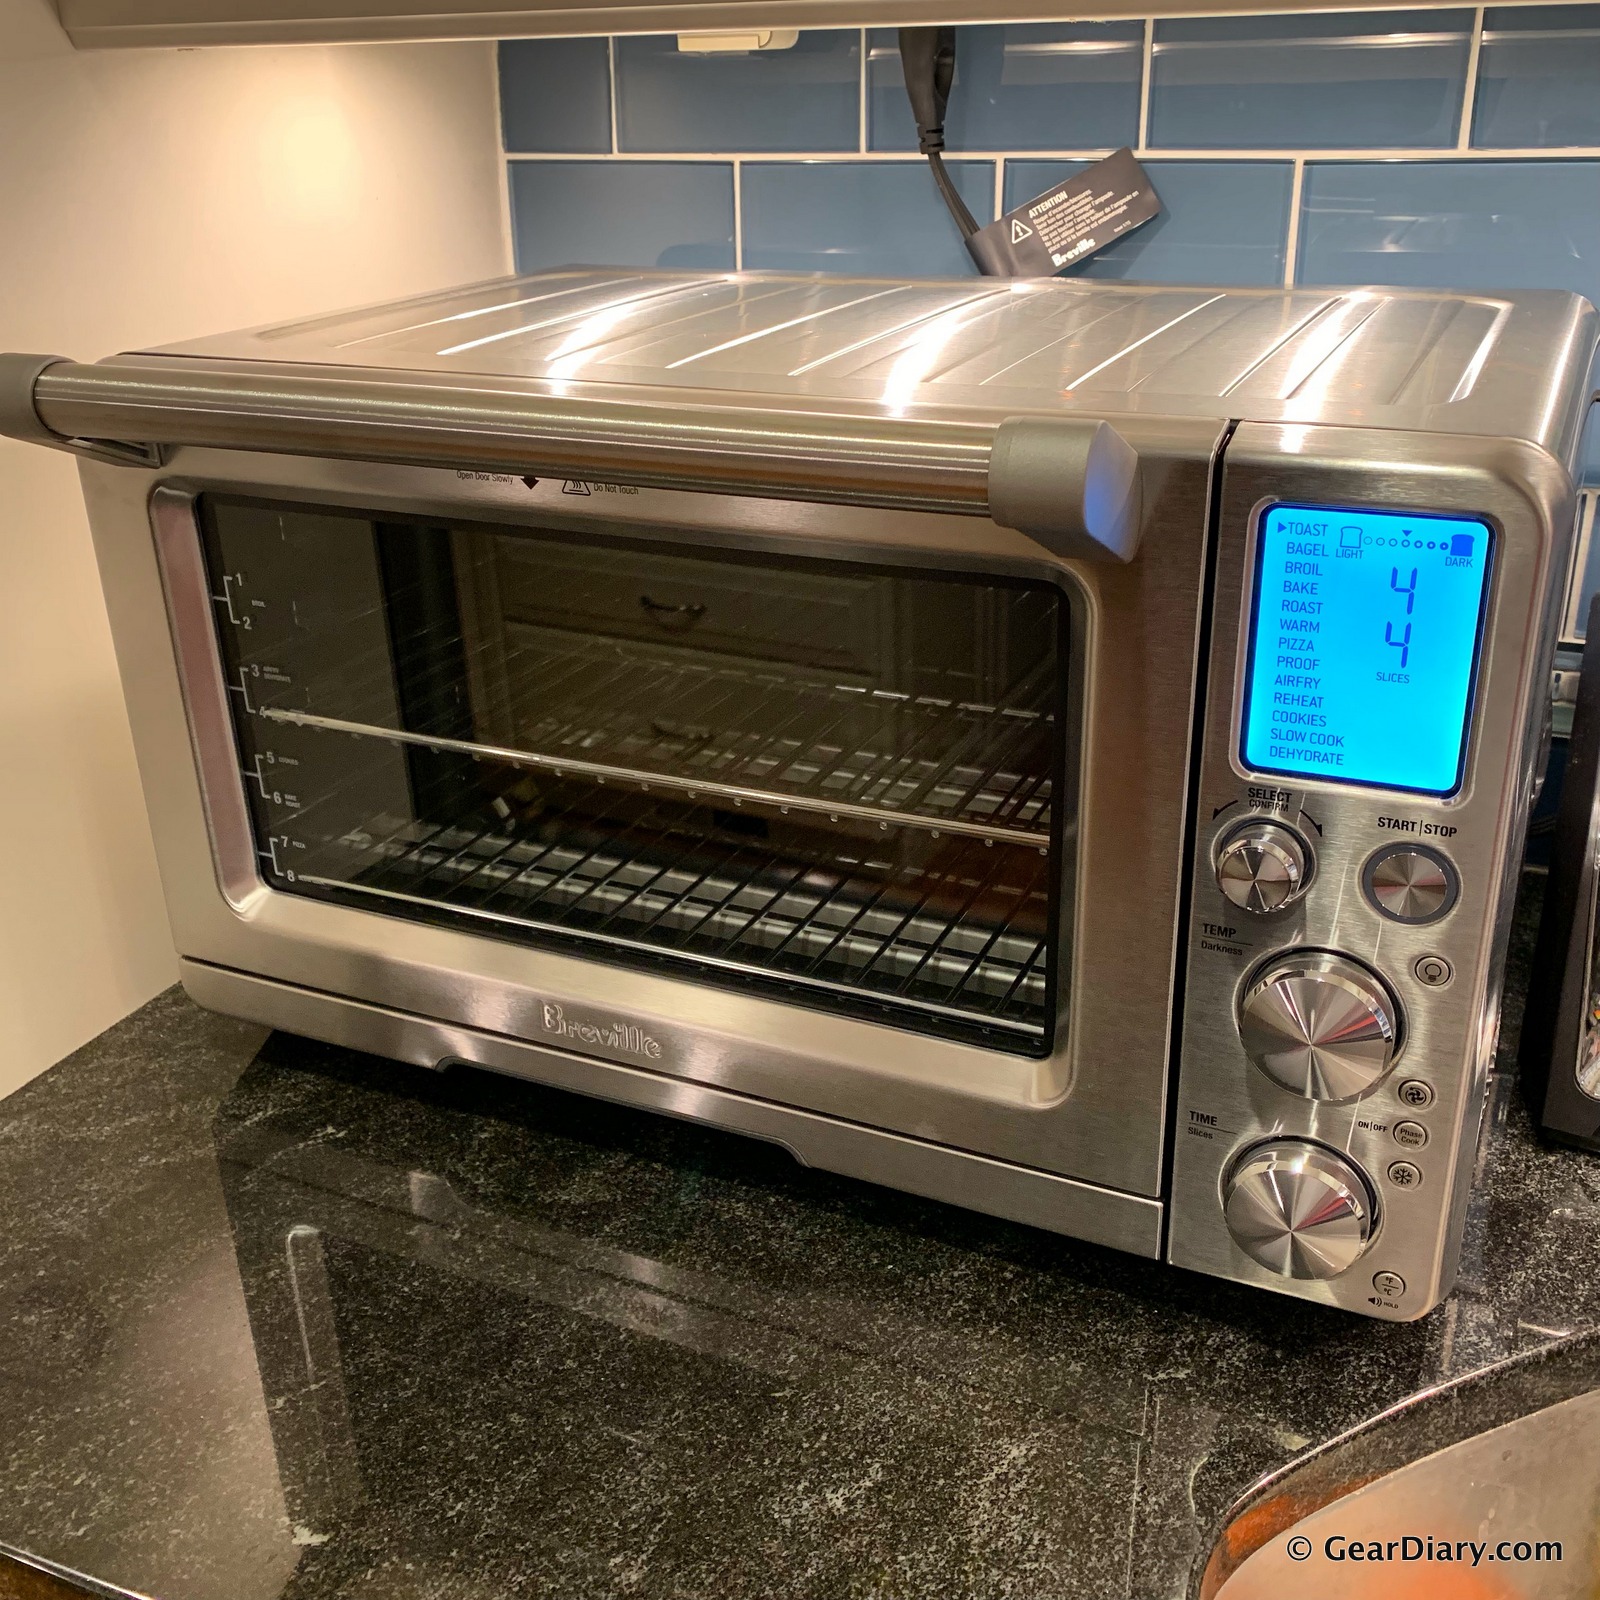 The Breville Smart Oven Air Is the Multi-Threat Gadget Your